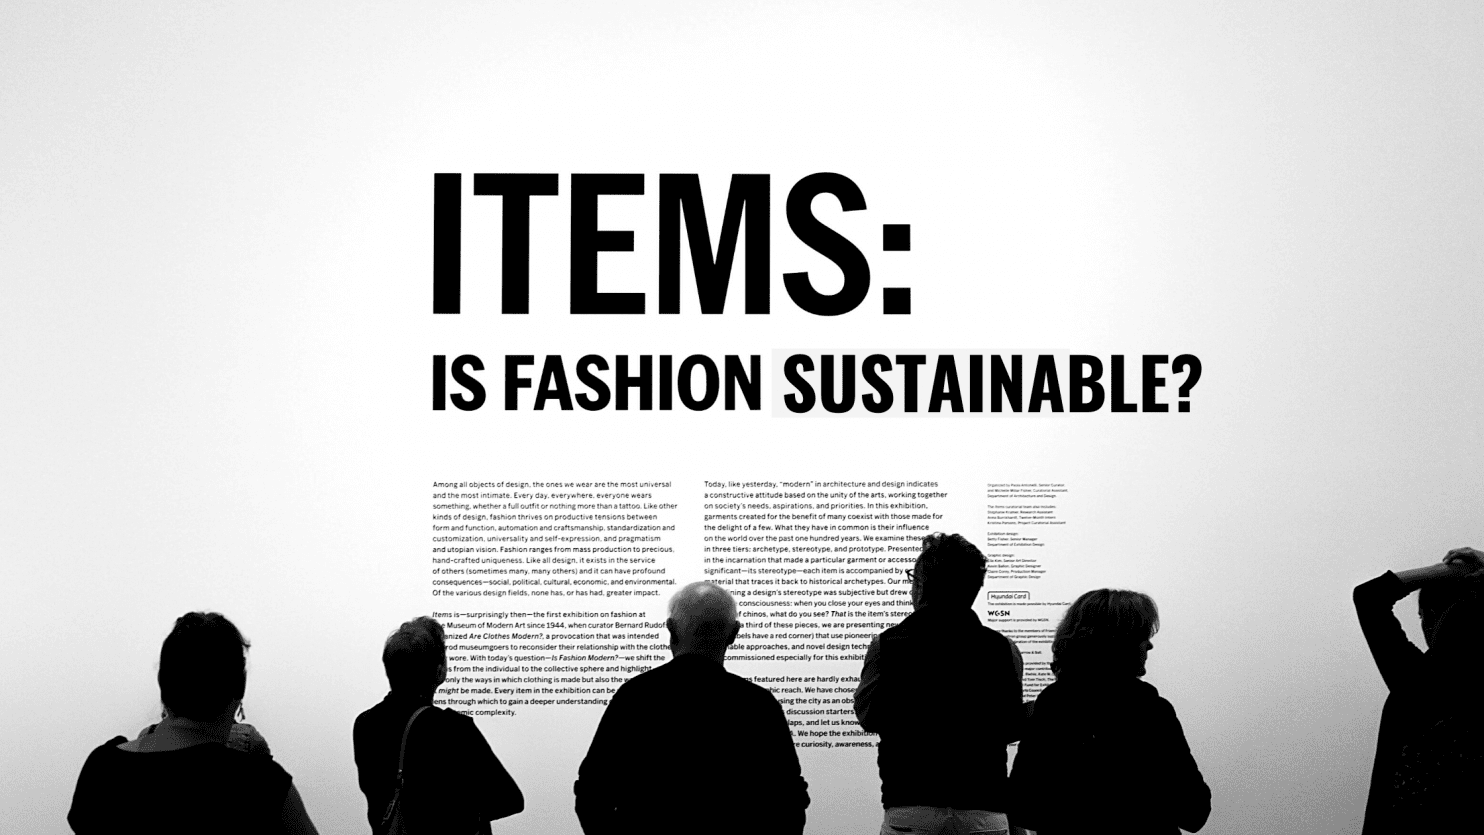 sustainability in fashion, stars design group